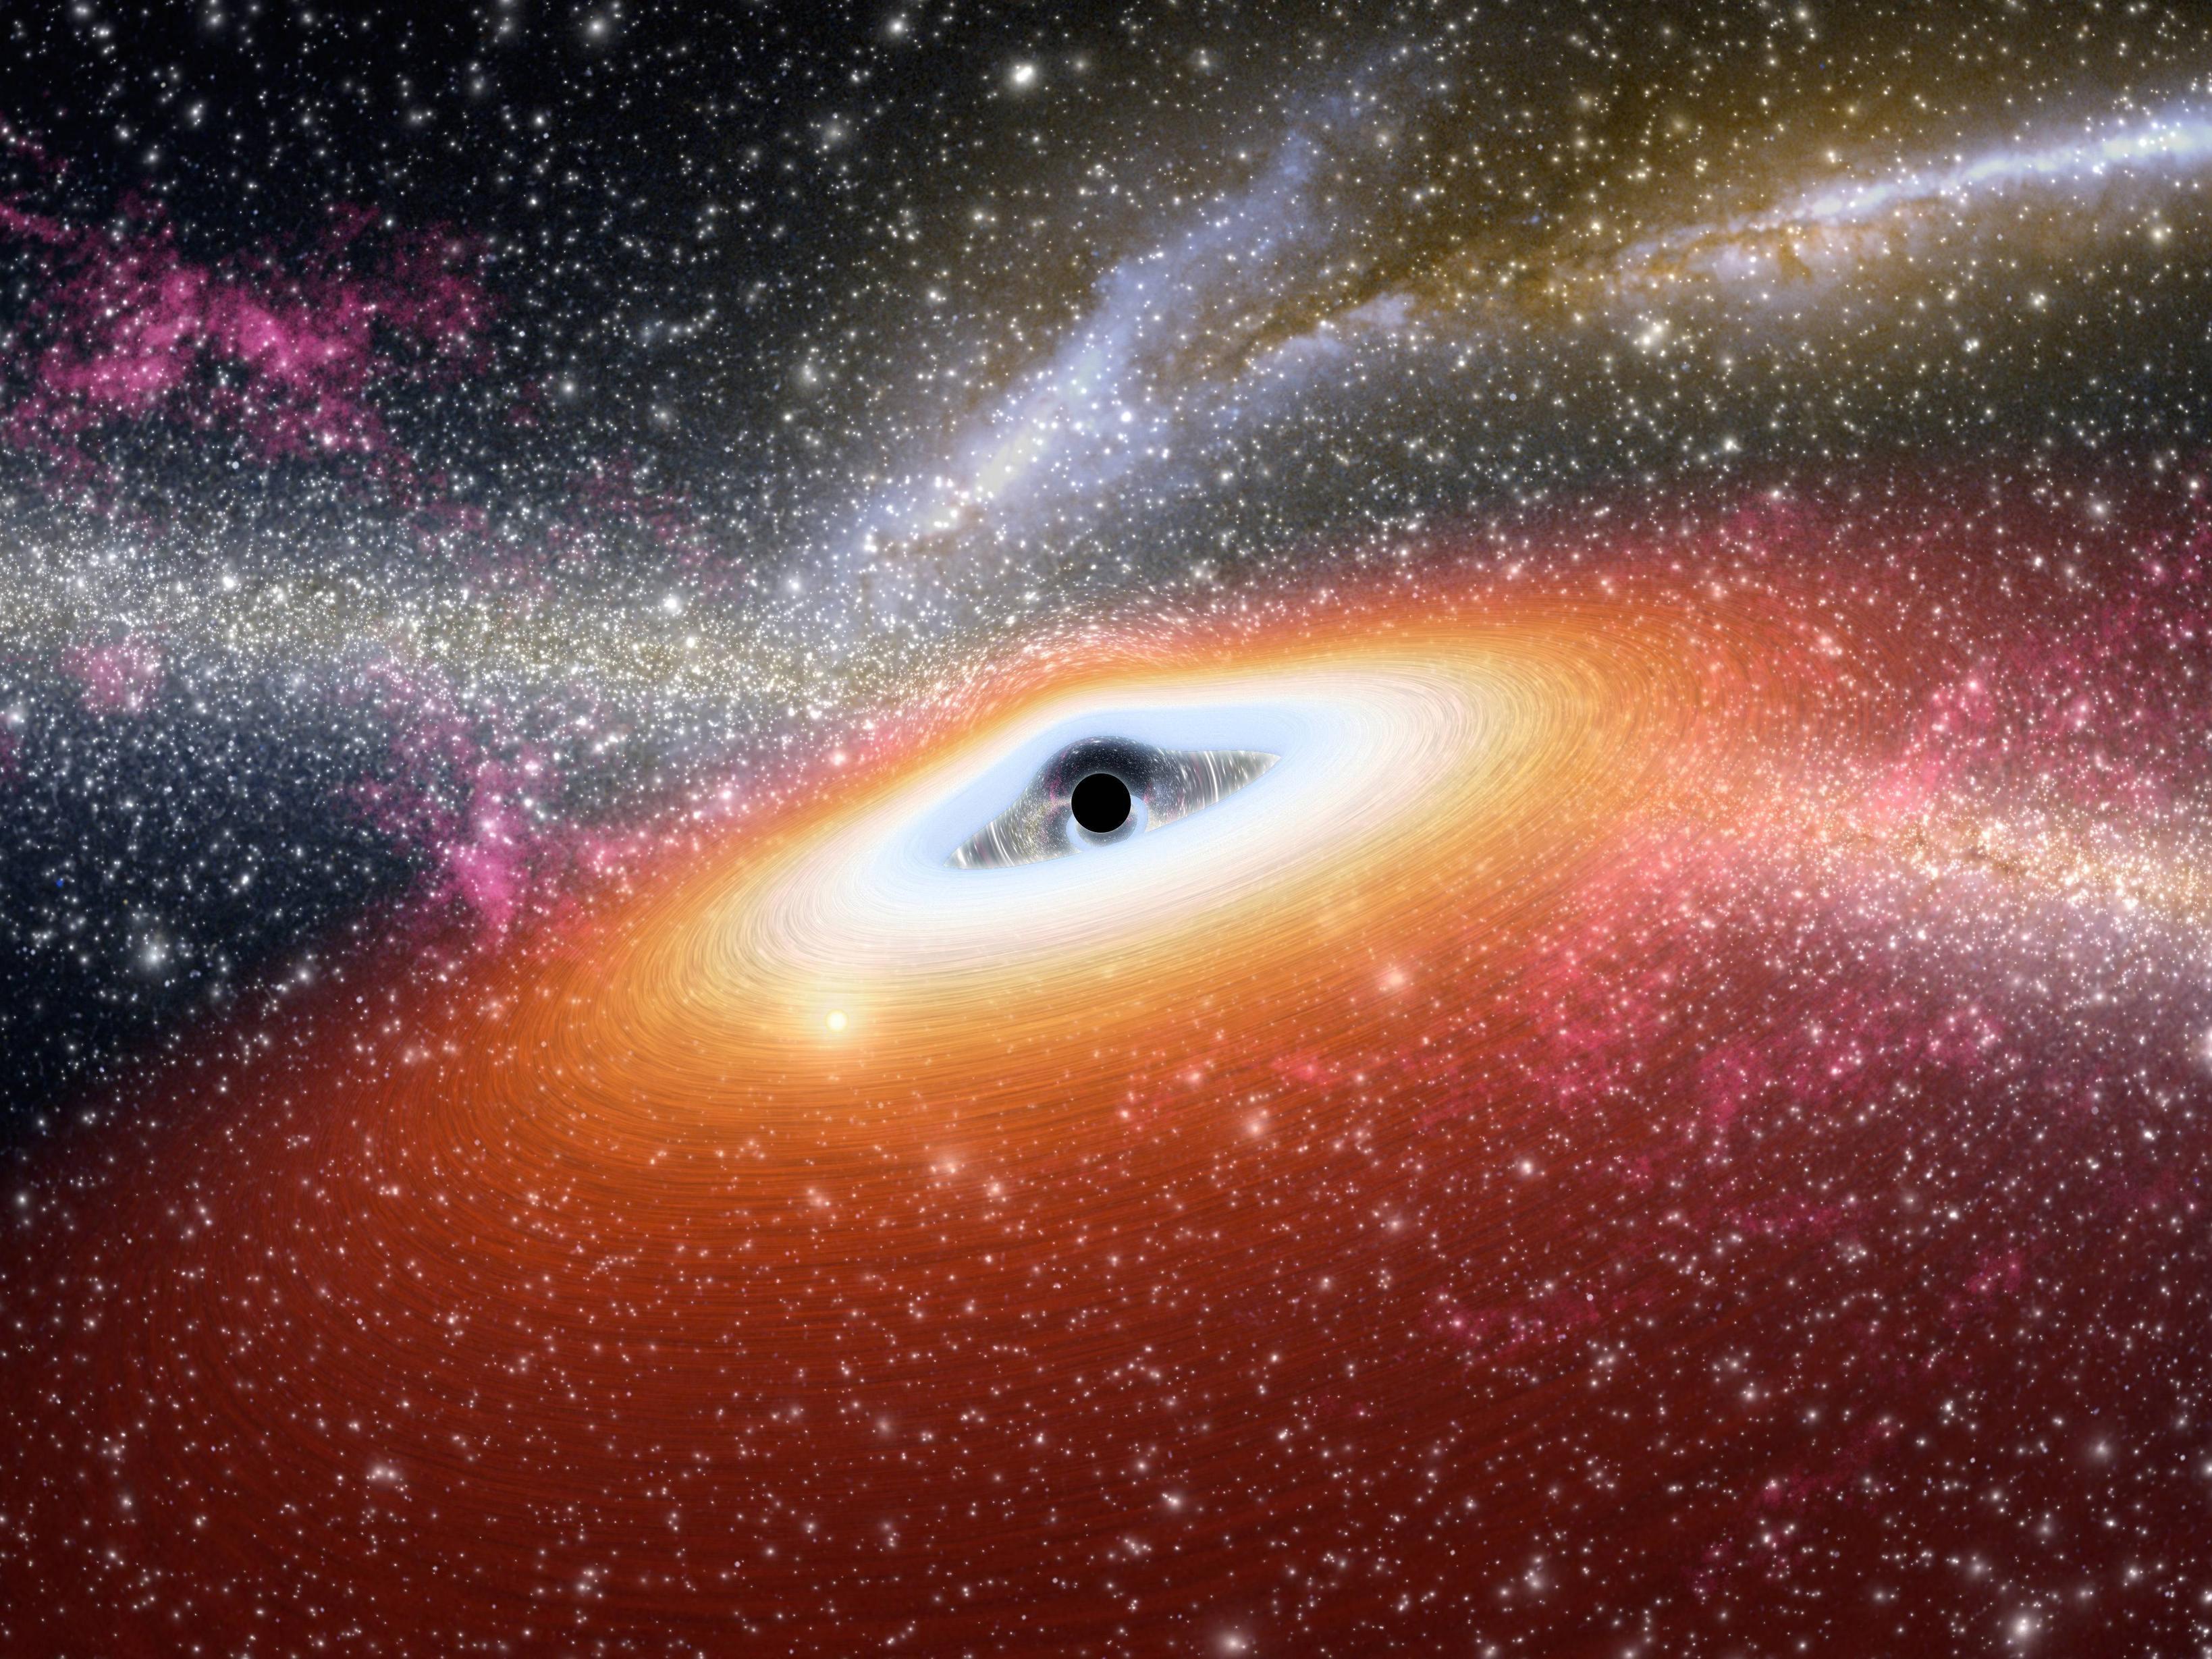 Discovery of Earliest Known Black Holes